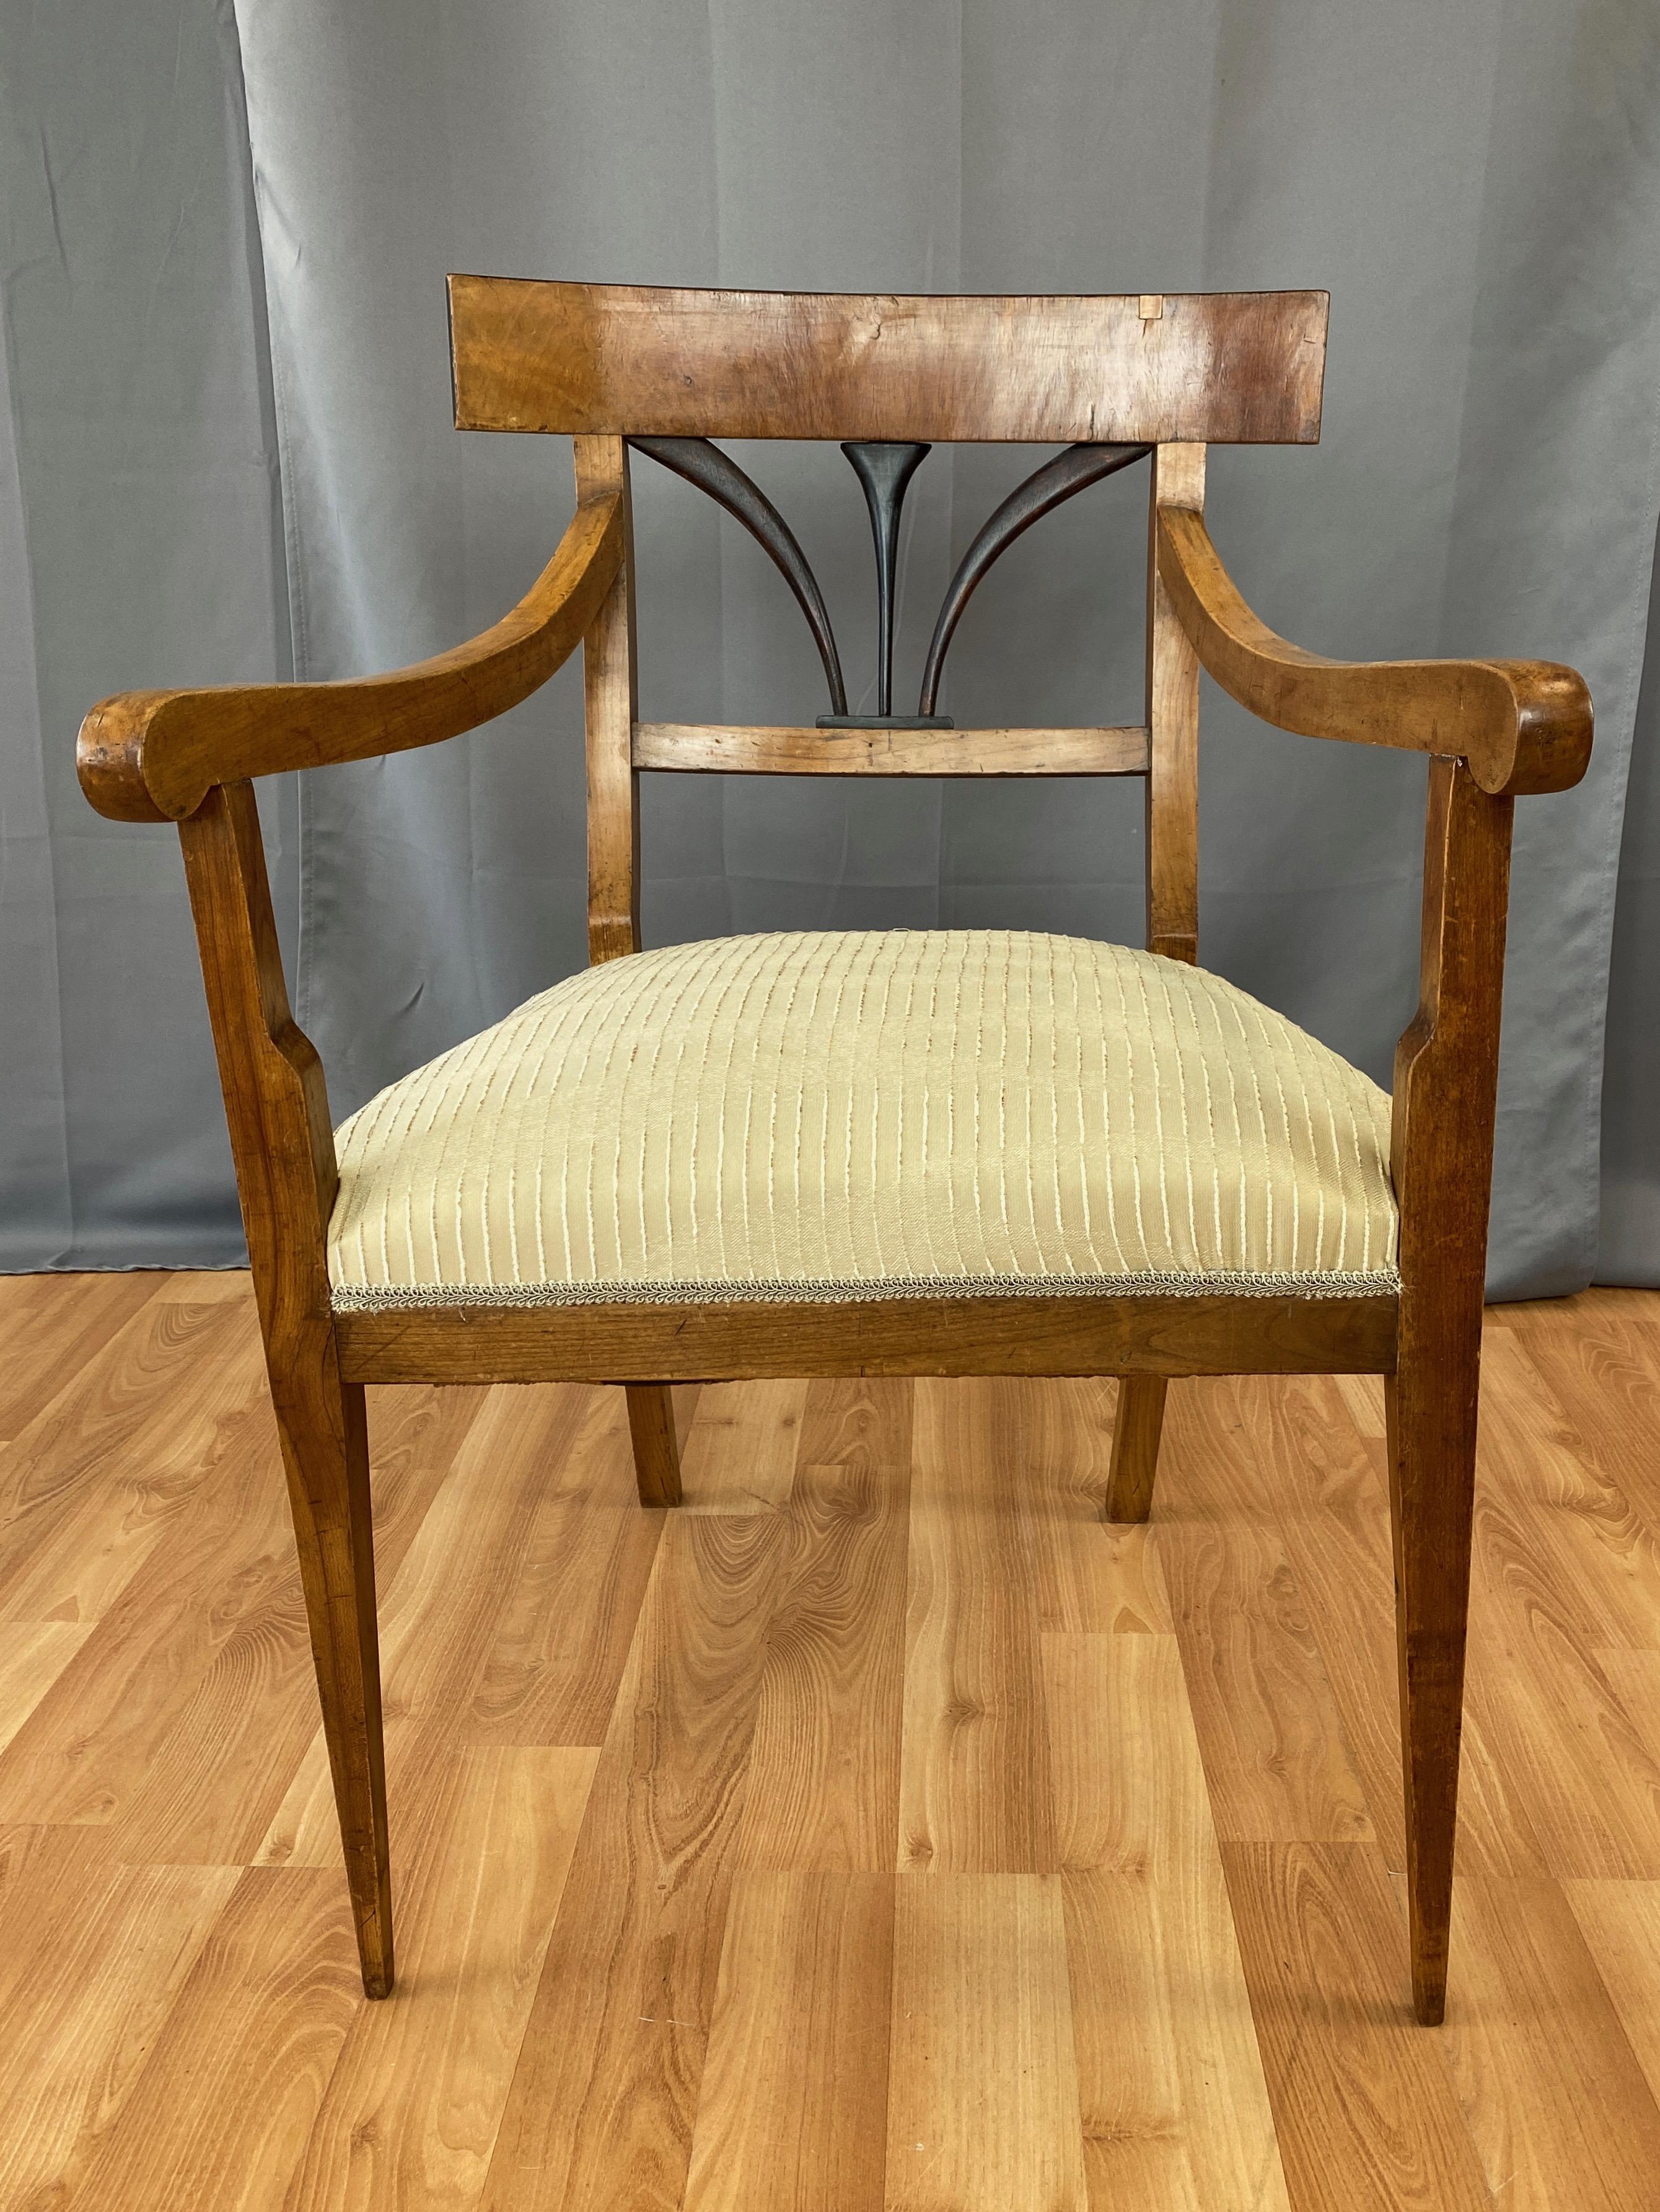 A very handsome circa 1825 Biedermeier armchair in fruitwood and ash with ebonized accents and upholstered seat.

Restrained neoclassical lines exhibit subdued sophistication. Understated yet elegant details throughout, including needle-like front